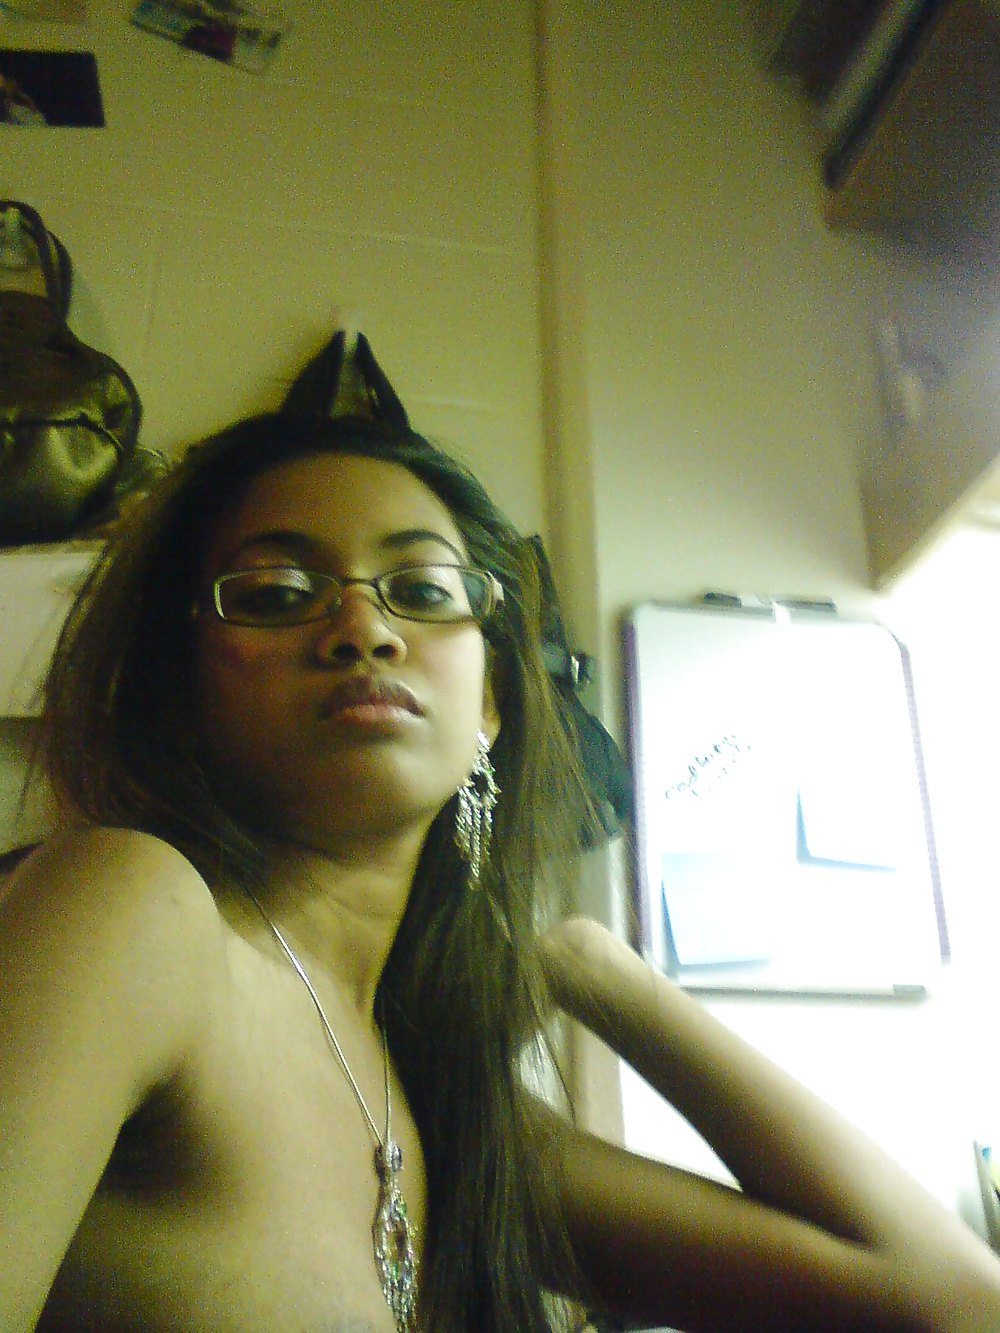 Sexy Black Chick With Glasses #17666053